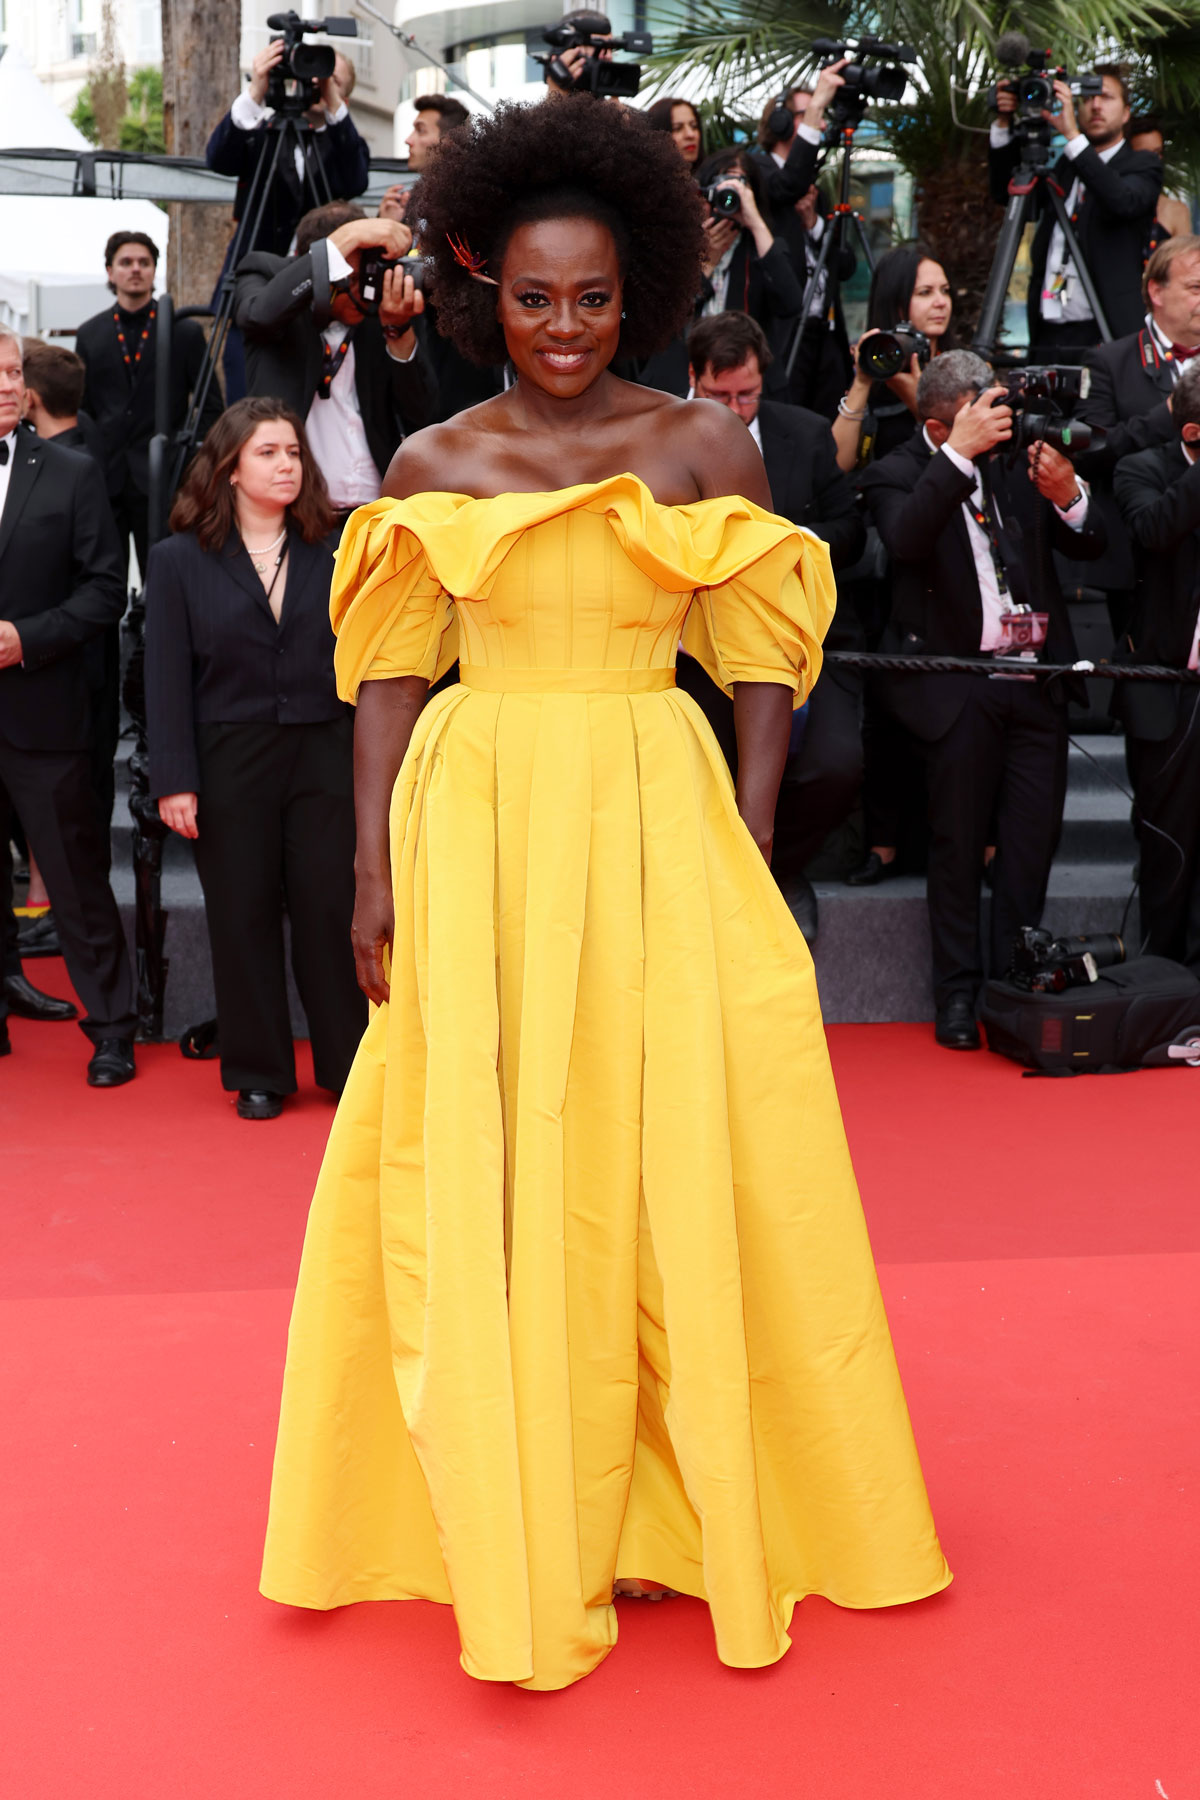 viola davis wearing a yellow off-the-shoulder gown at the cannes film festival